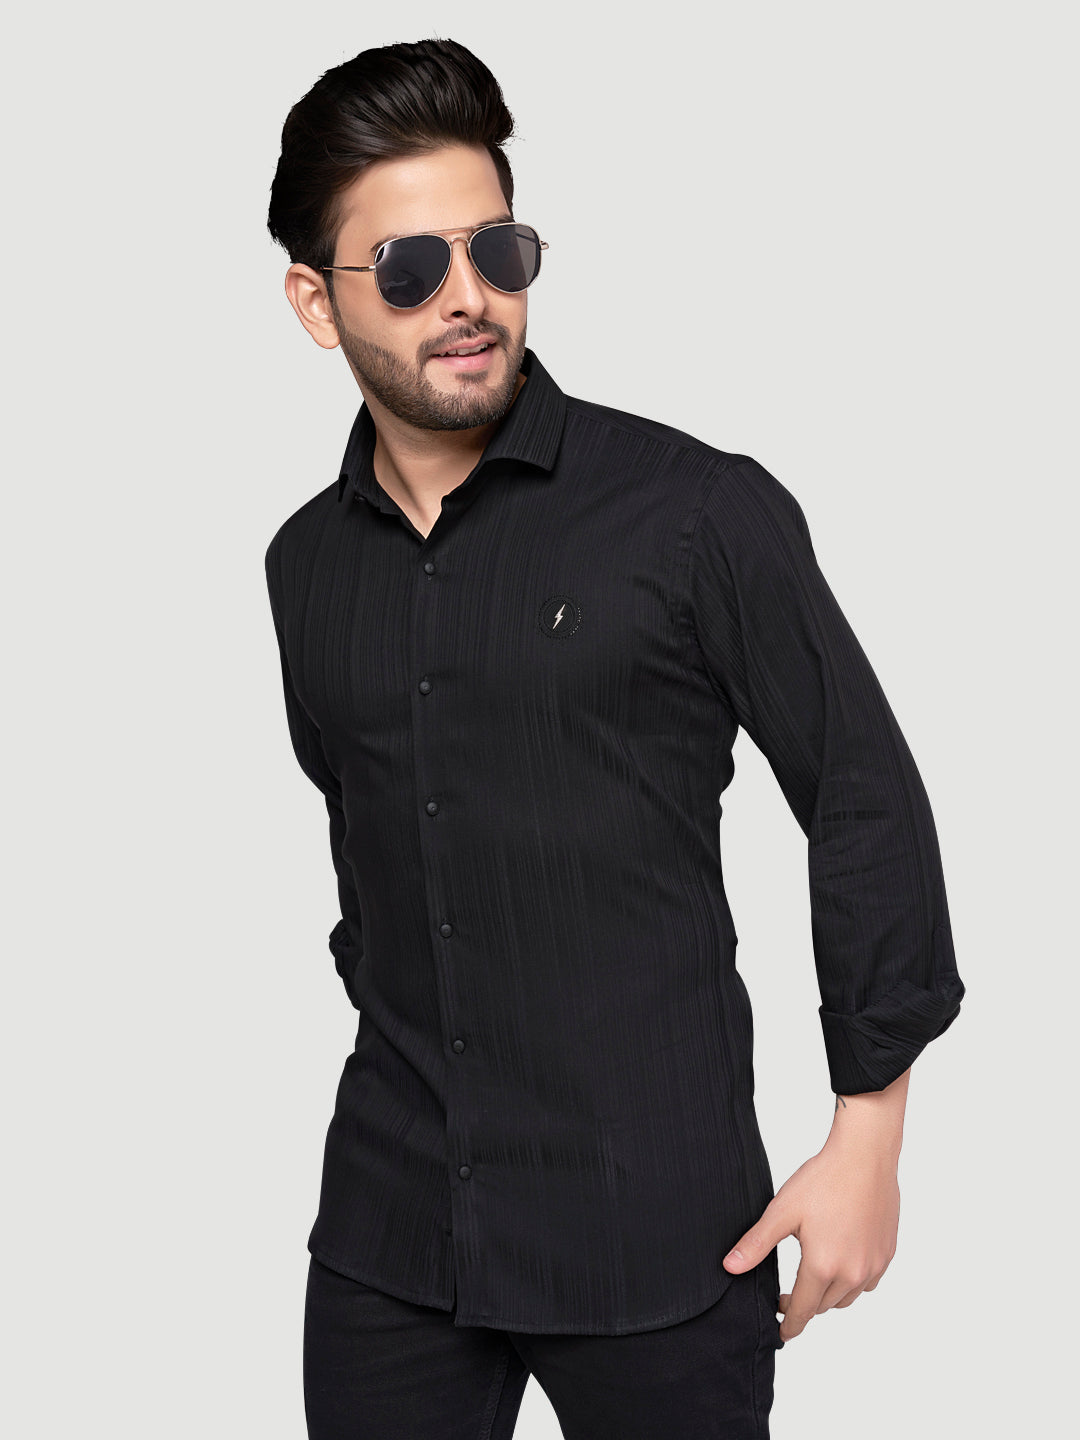 Black and White Shirts Men's Designer Shirt with Broach-4